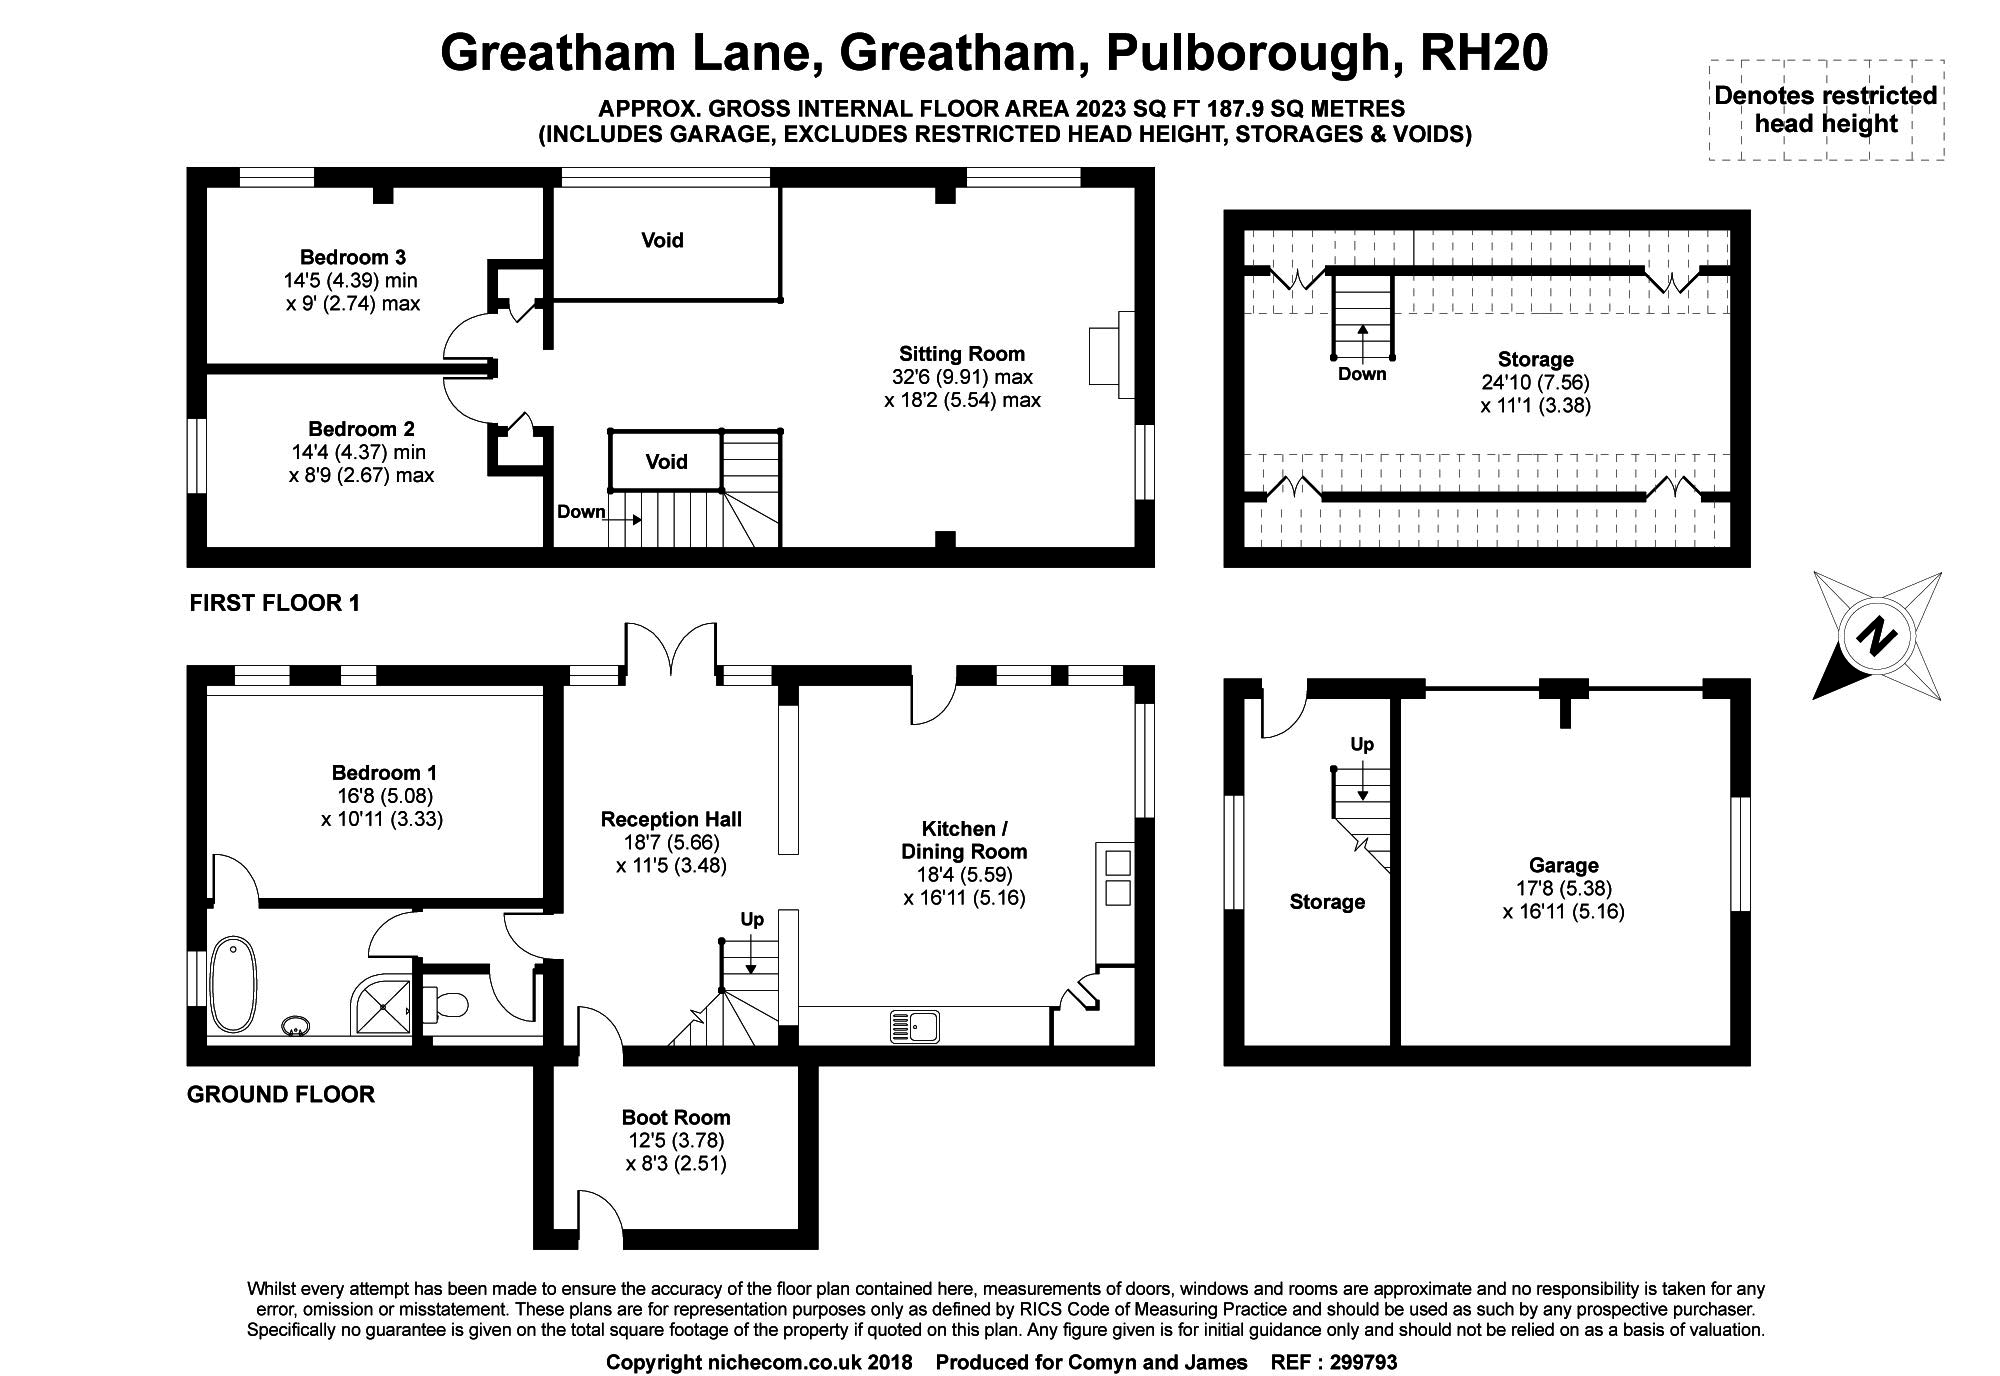 3 Bedrooms Barn conversion for sale in Greatham Lane, Greatham, Pulborough RH20